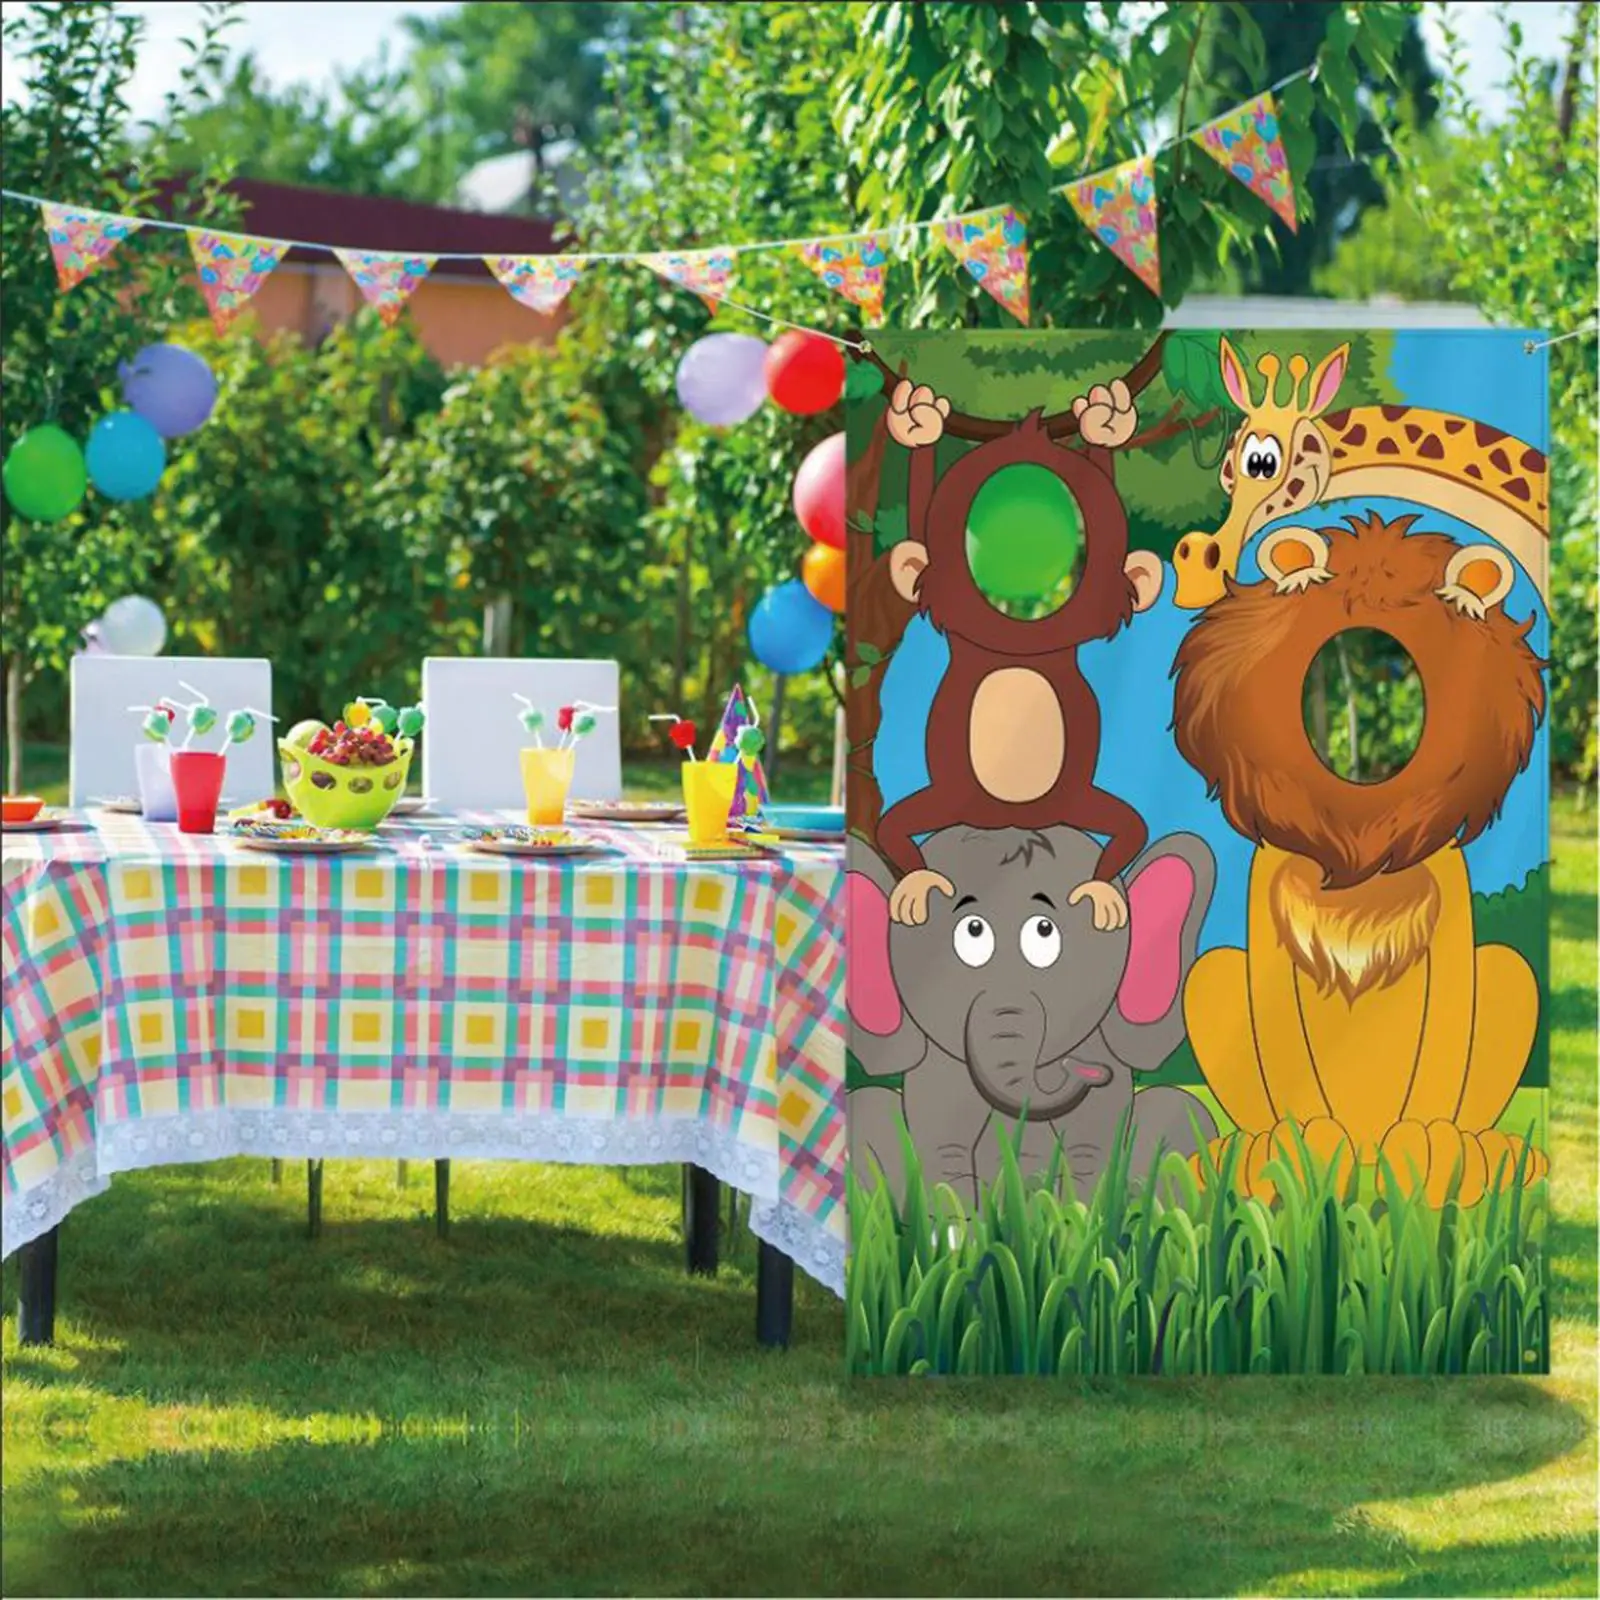 Wild  Photo Prop Backdrop with Zoo Animals Elements Party Pictures 59 x 39 inch Birthday with 4 M String Bright Colors Durable